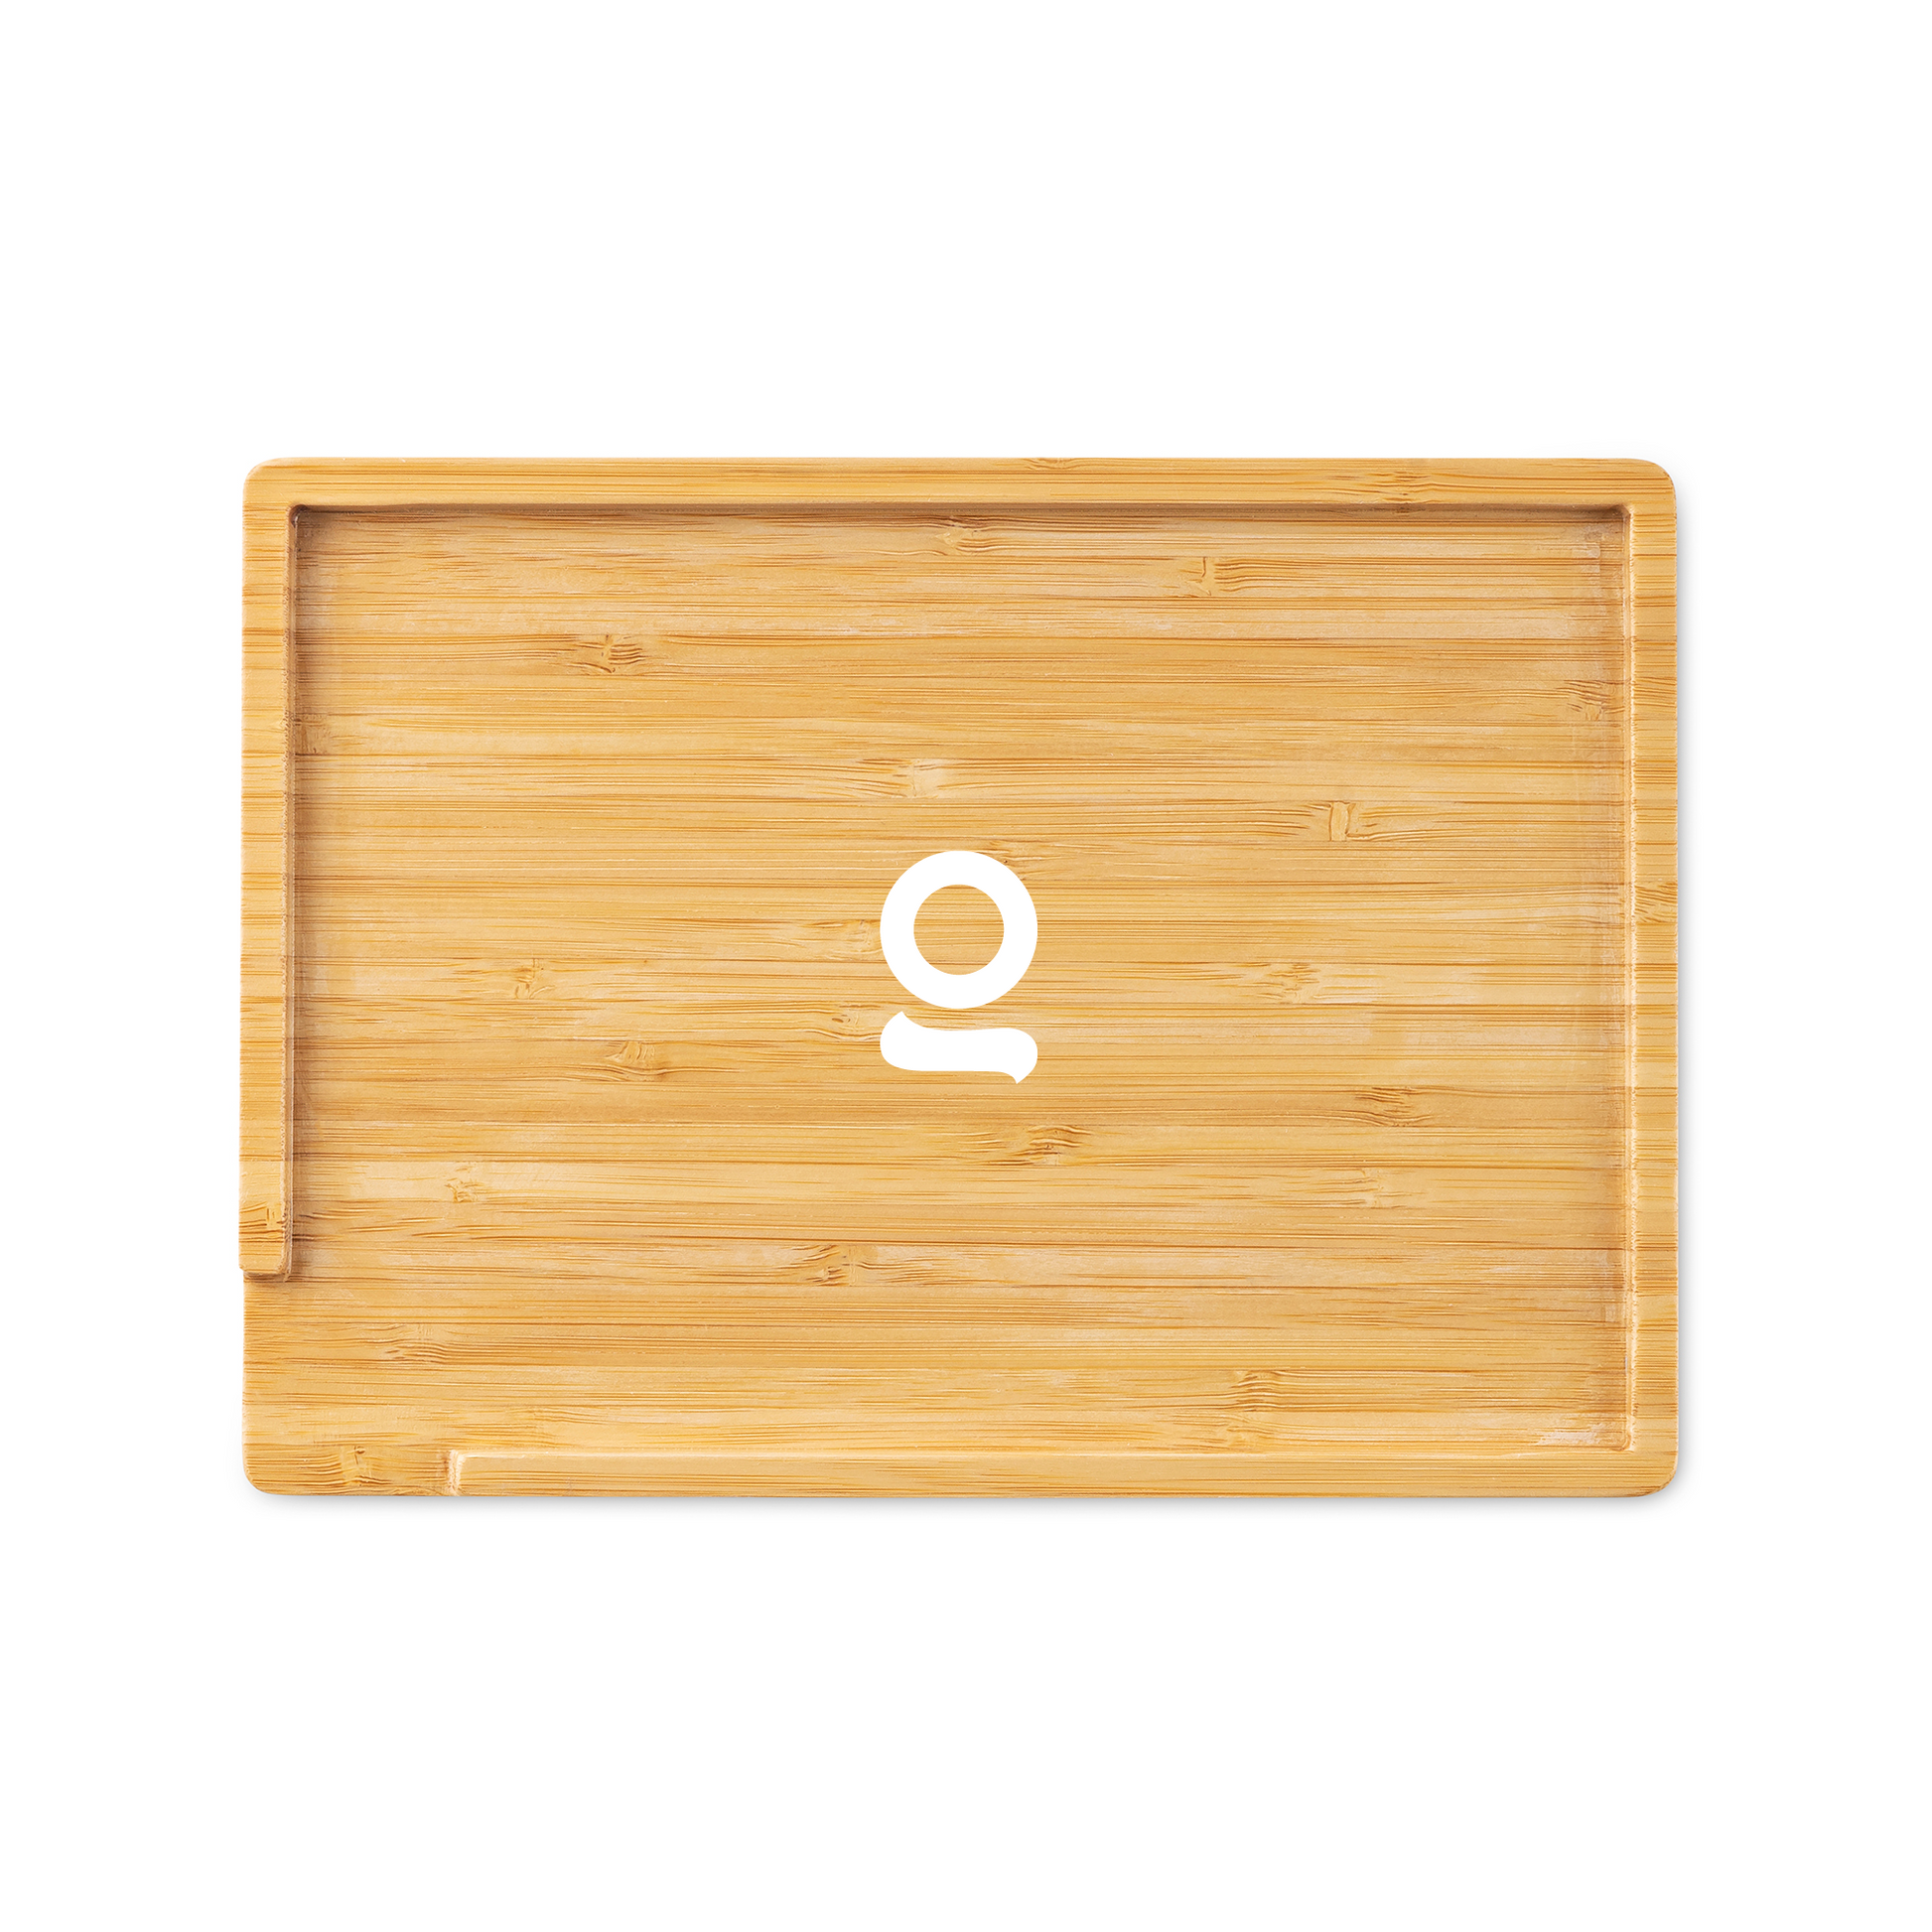 Ongrok Bamboo Rolling Tray by Ongrok | Mission Dispensary